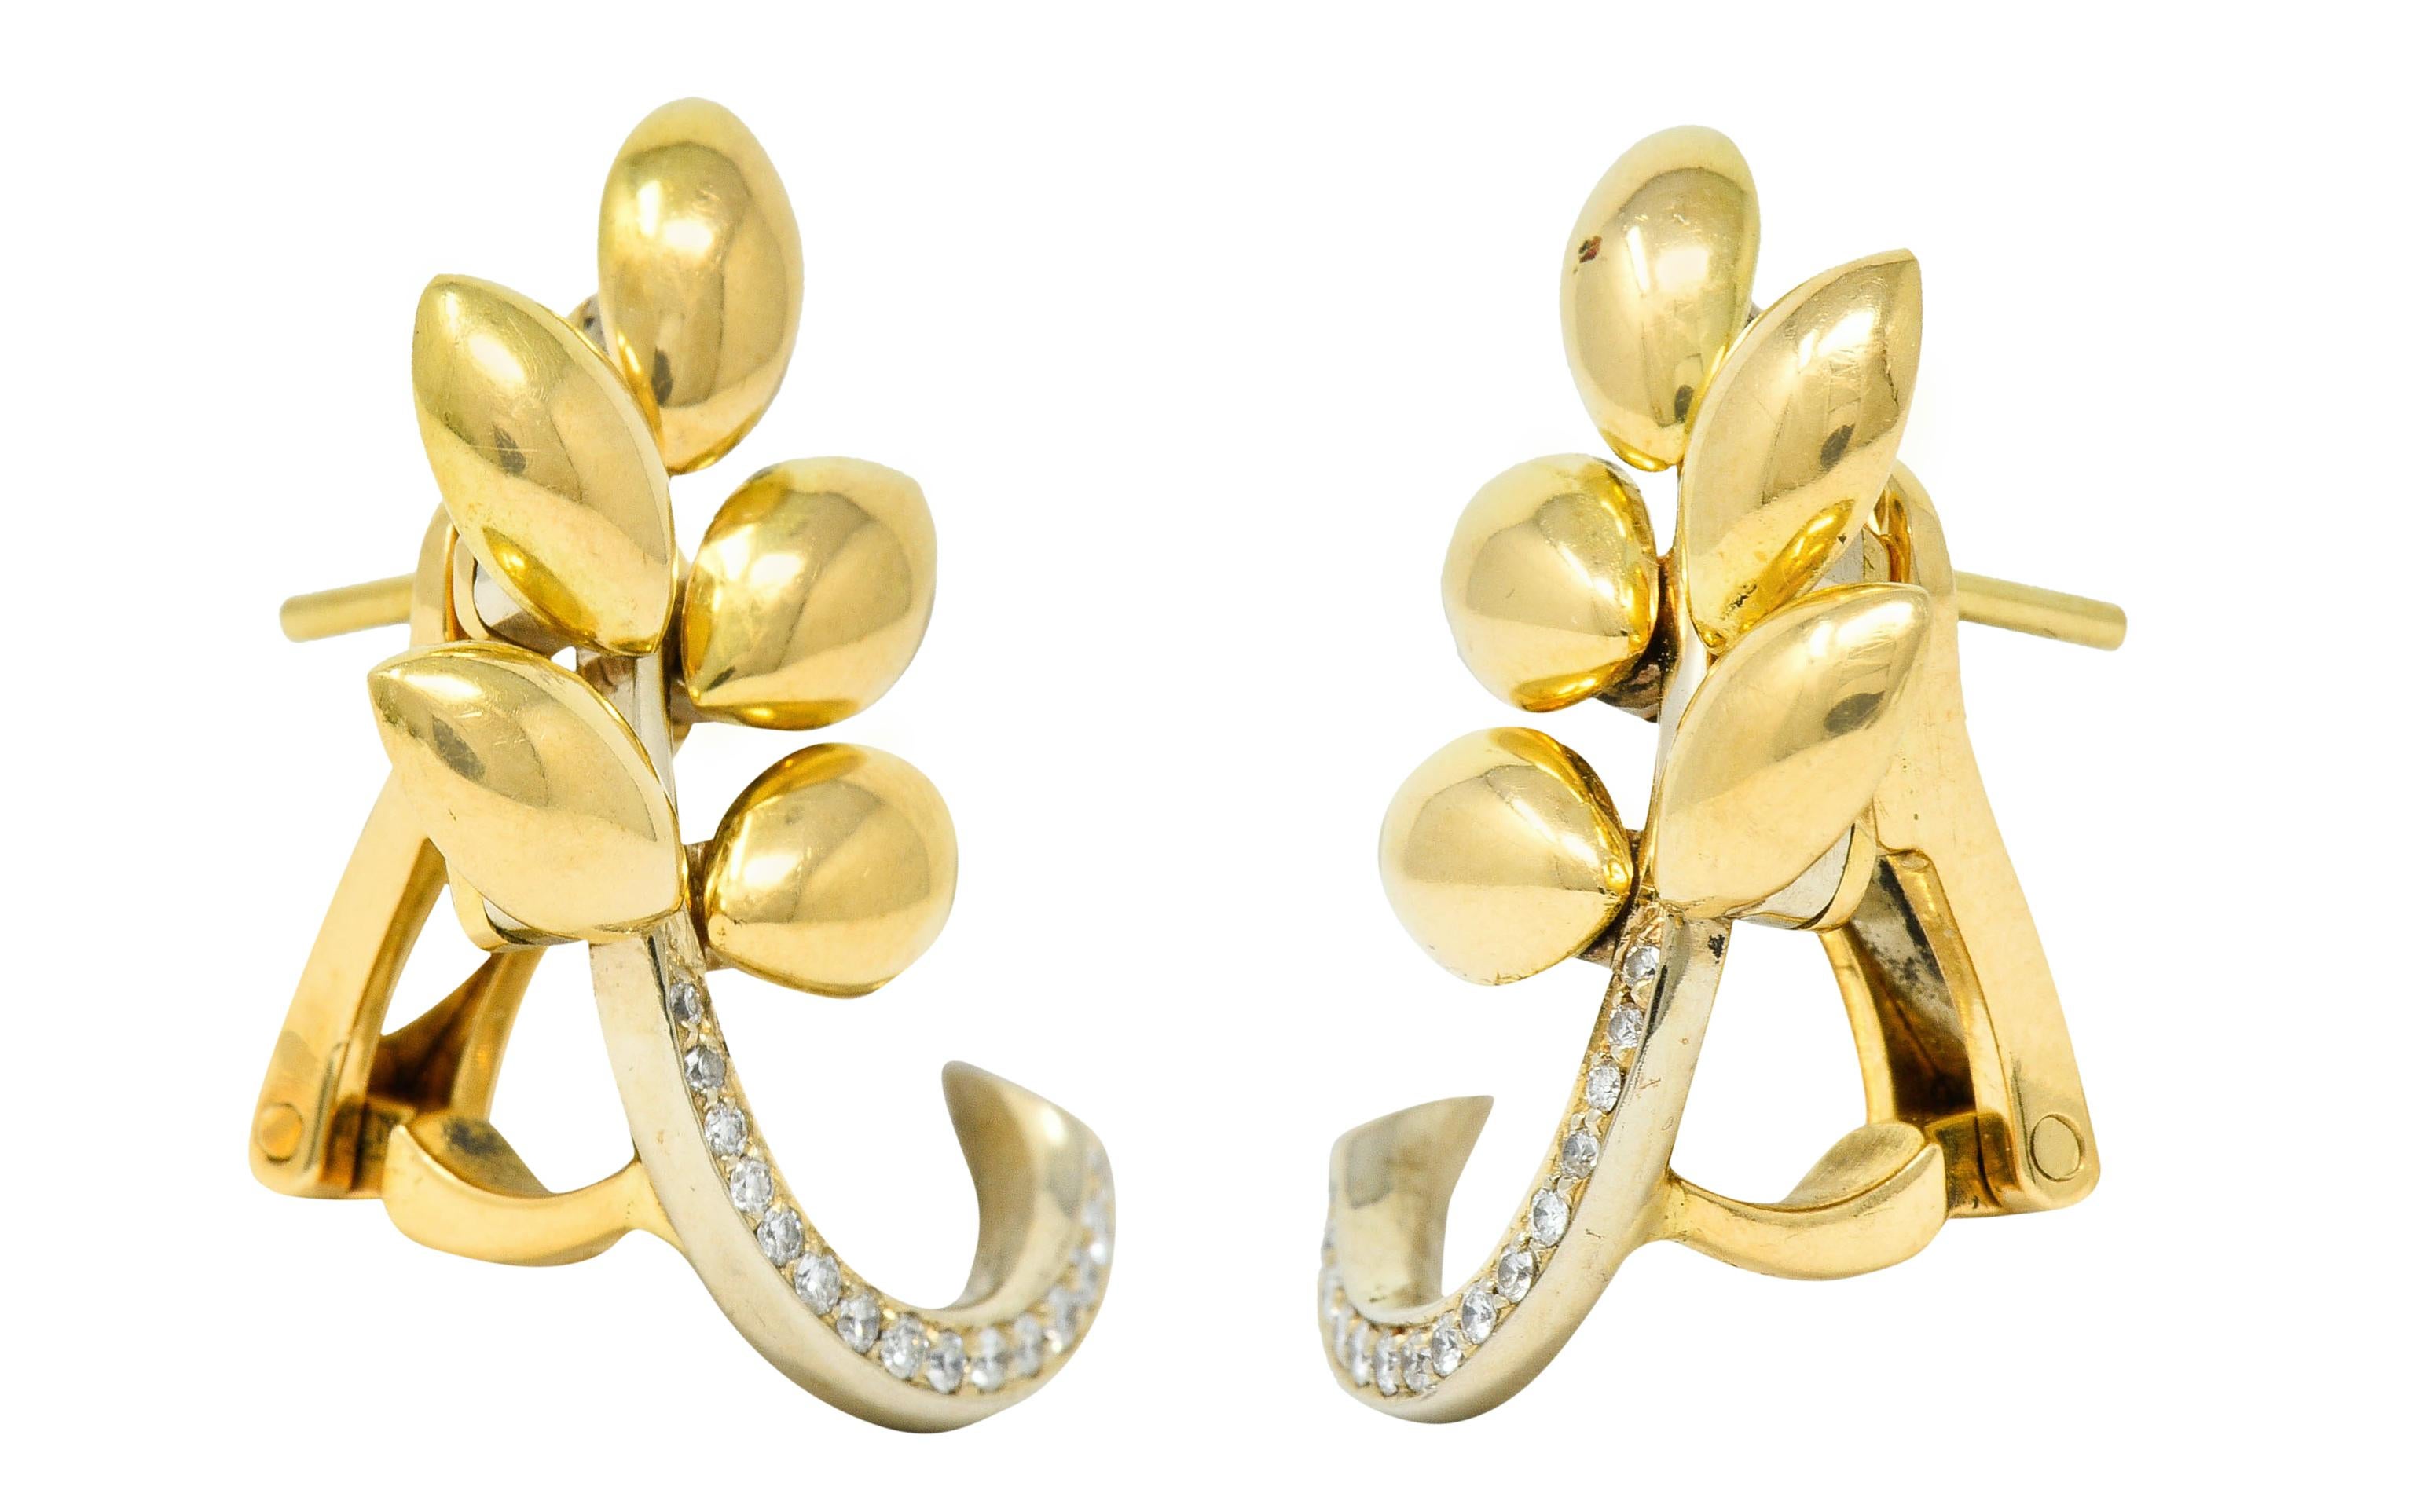 Each earring is designed as a strand of high polished wheat

With slightly articulated yellow gold grains and a torqued white gold stem

Stem is bead set throughout by round brilliant cut diamonds, graduating in size

Weighing in total approximately